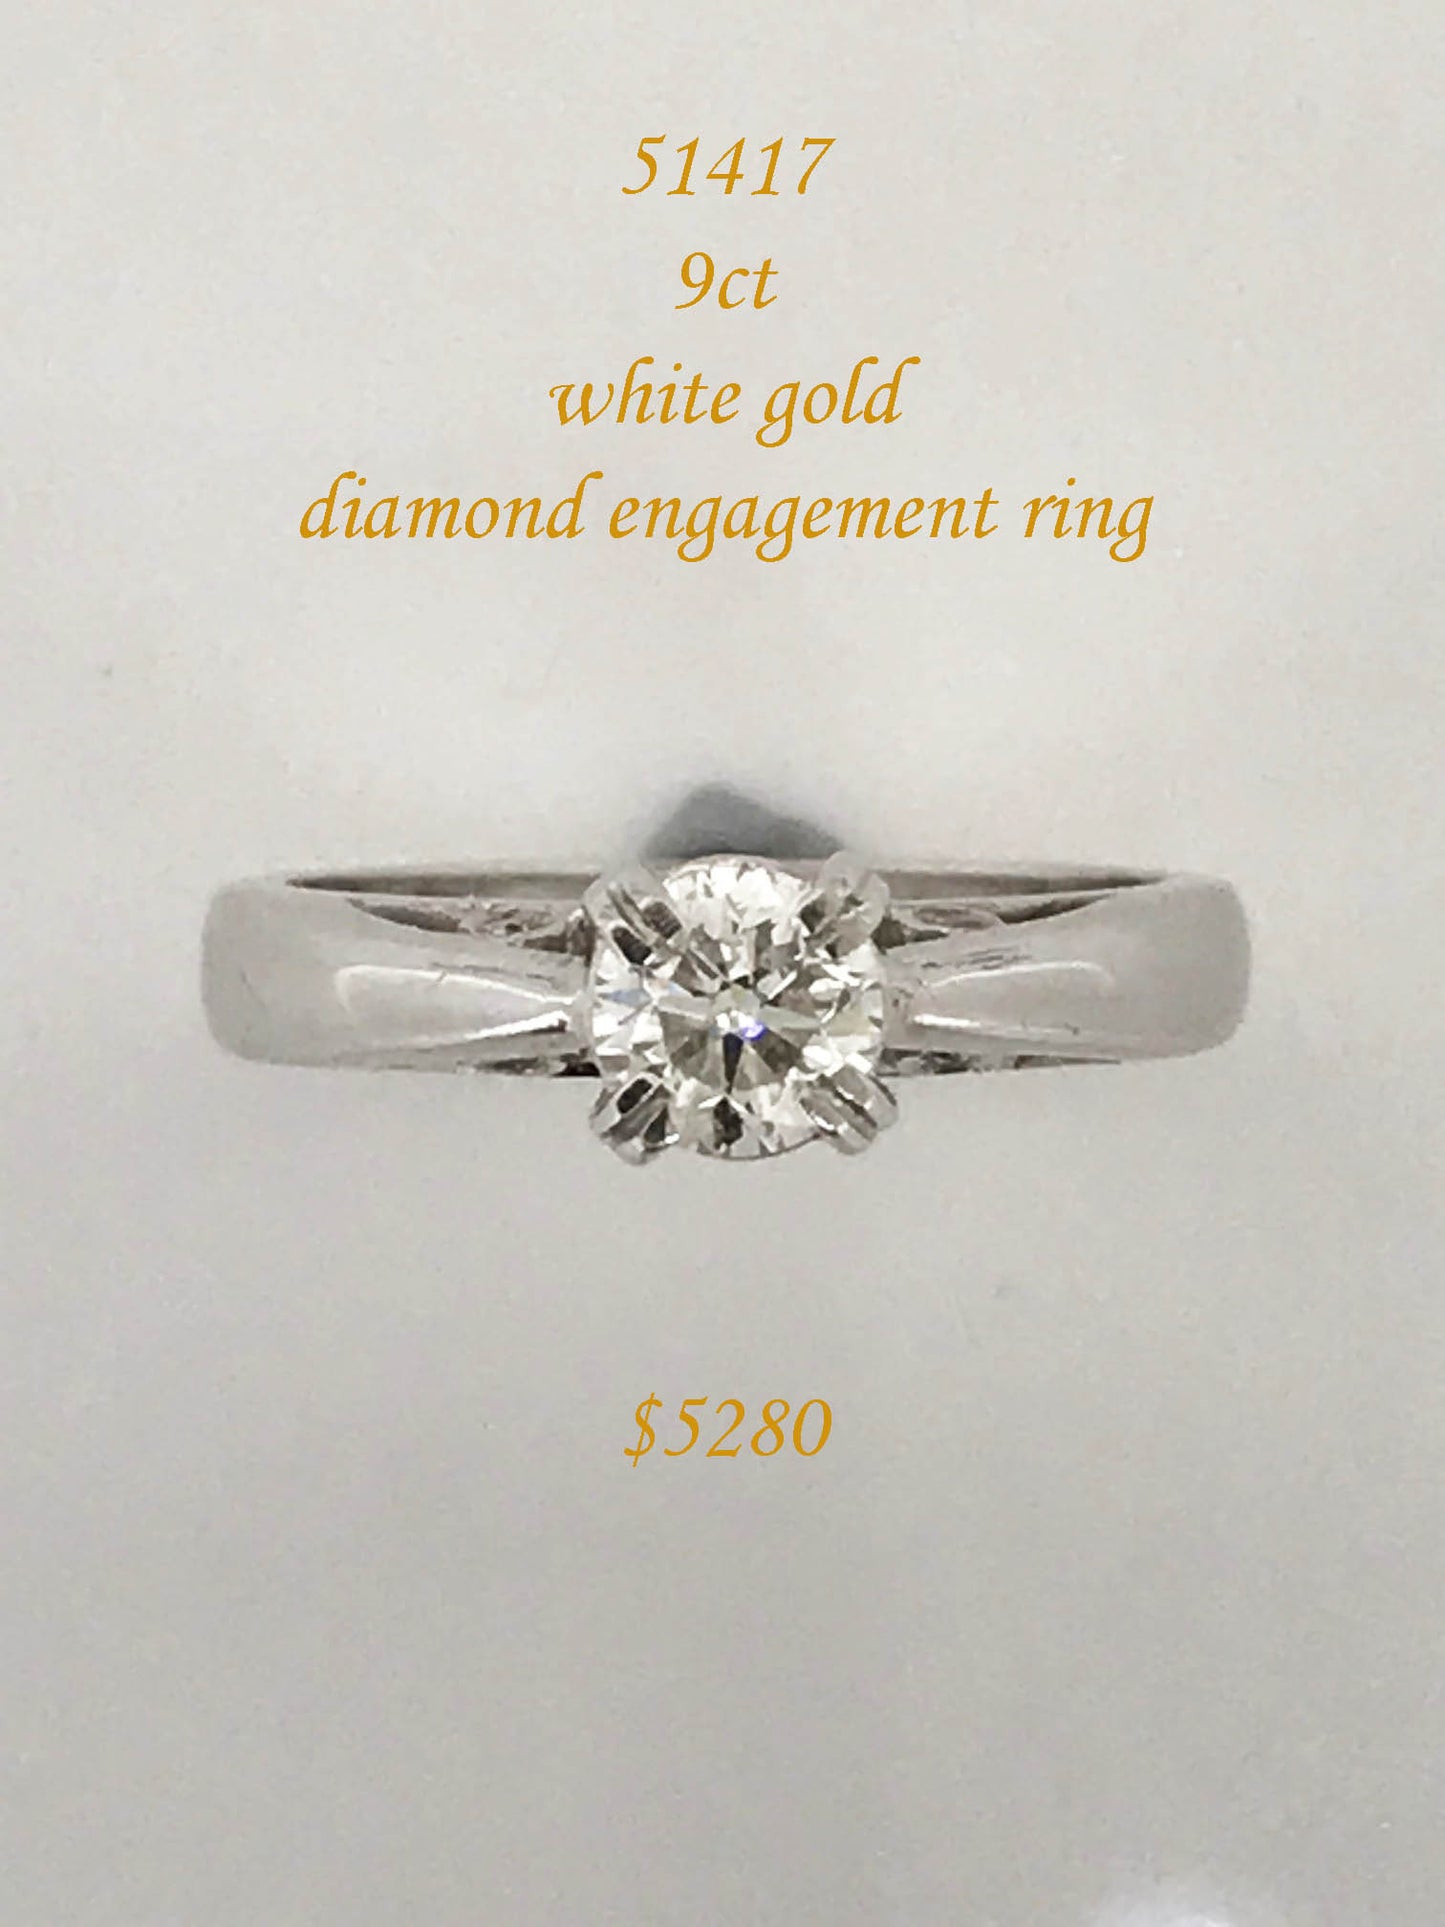 Solitaire white gold engagement ring of 0.60carats